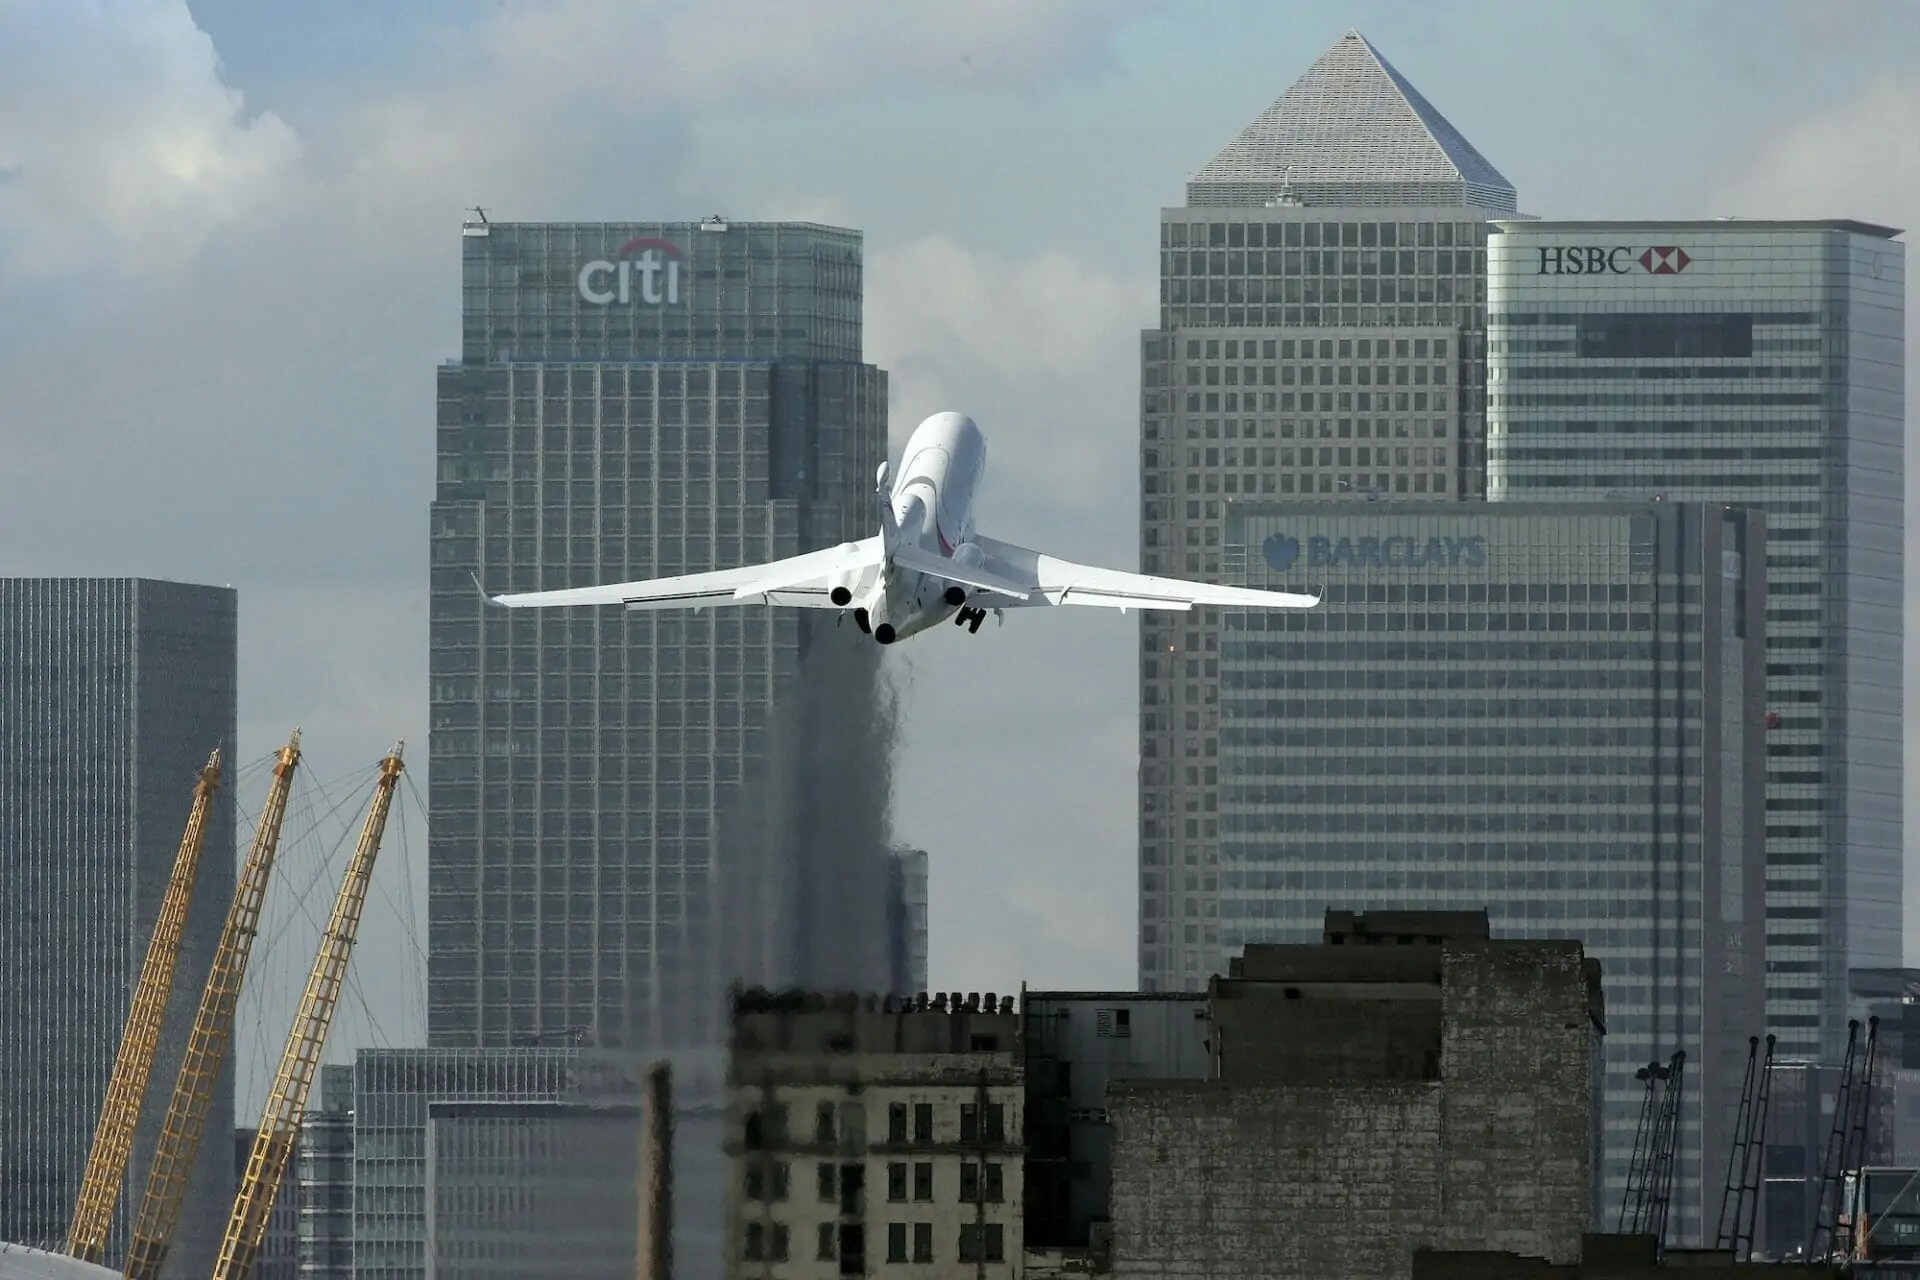 Dassault Falcon 8X taking off from London City airport